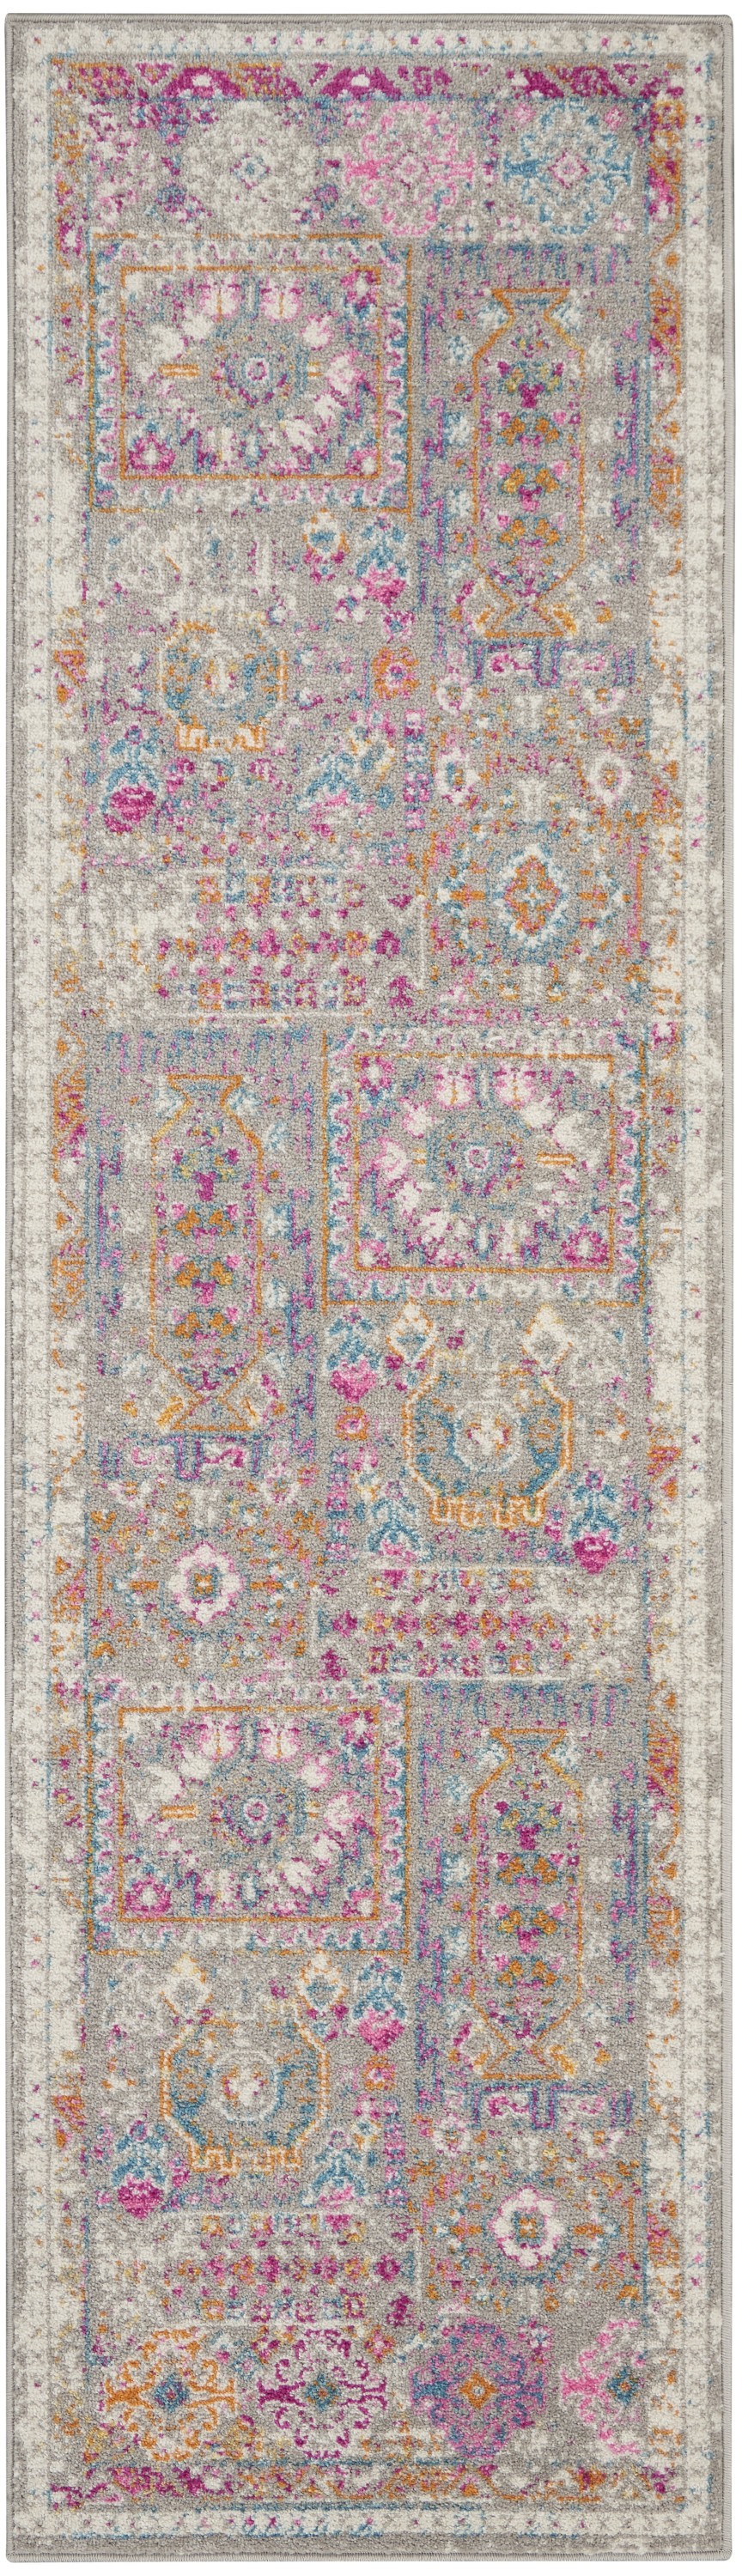 8' Pink And Gray Abstract Power Loom Runner Rug-385722-1